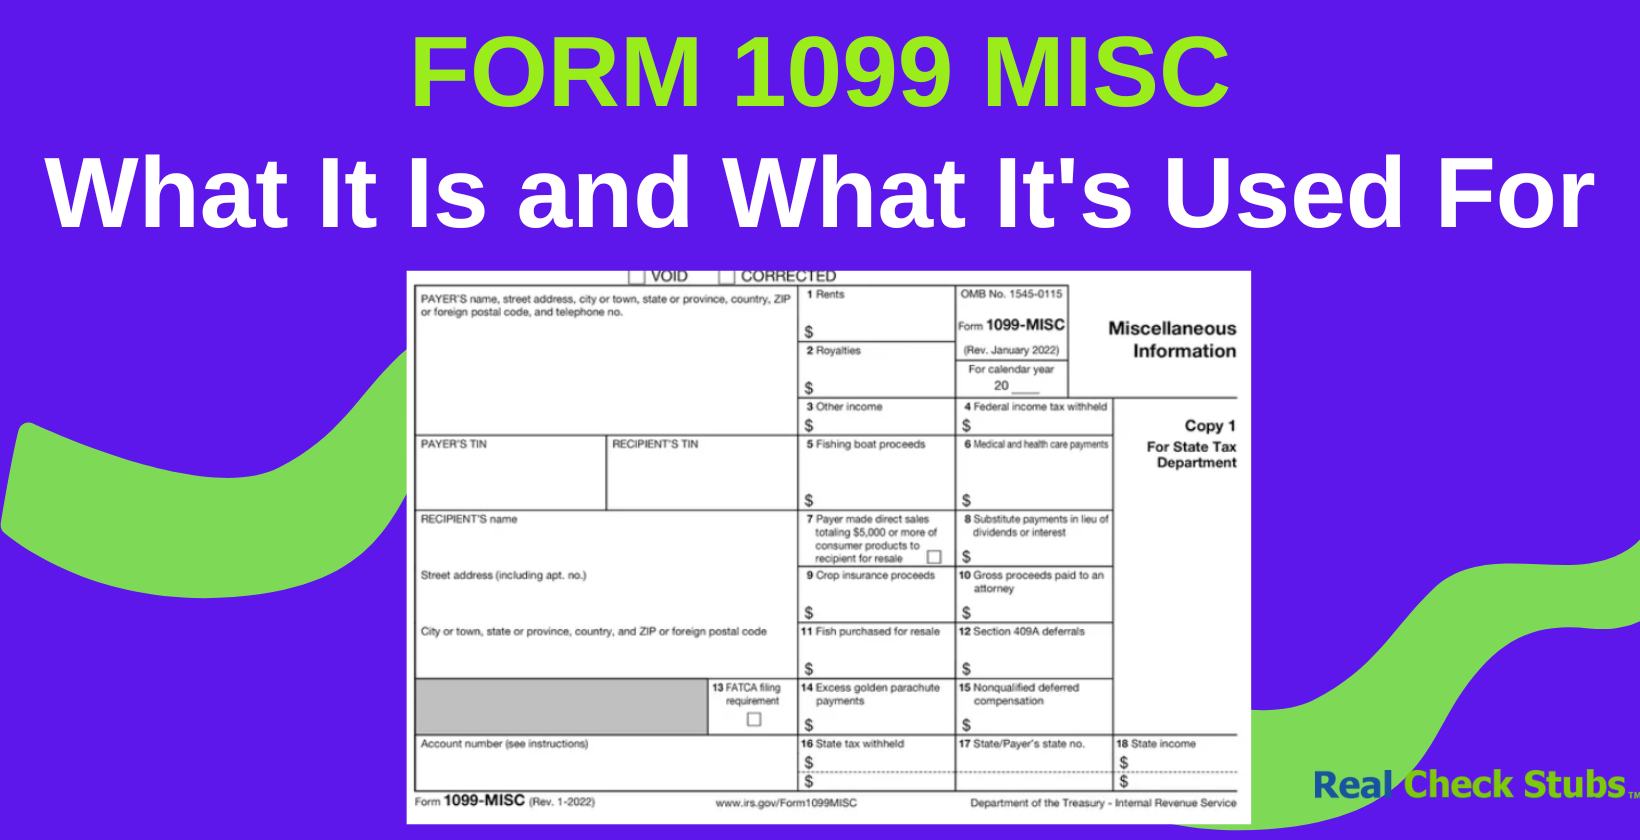 IRS Form 1099-MISC